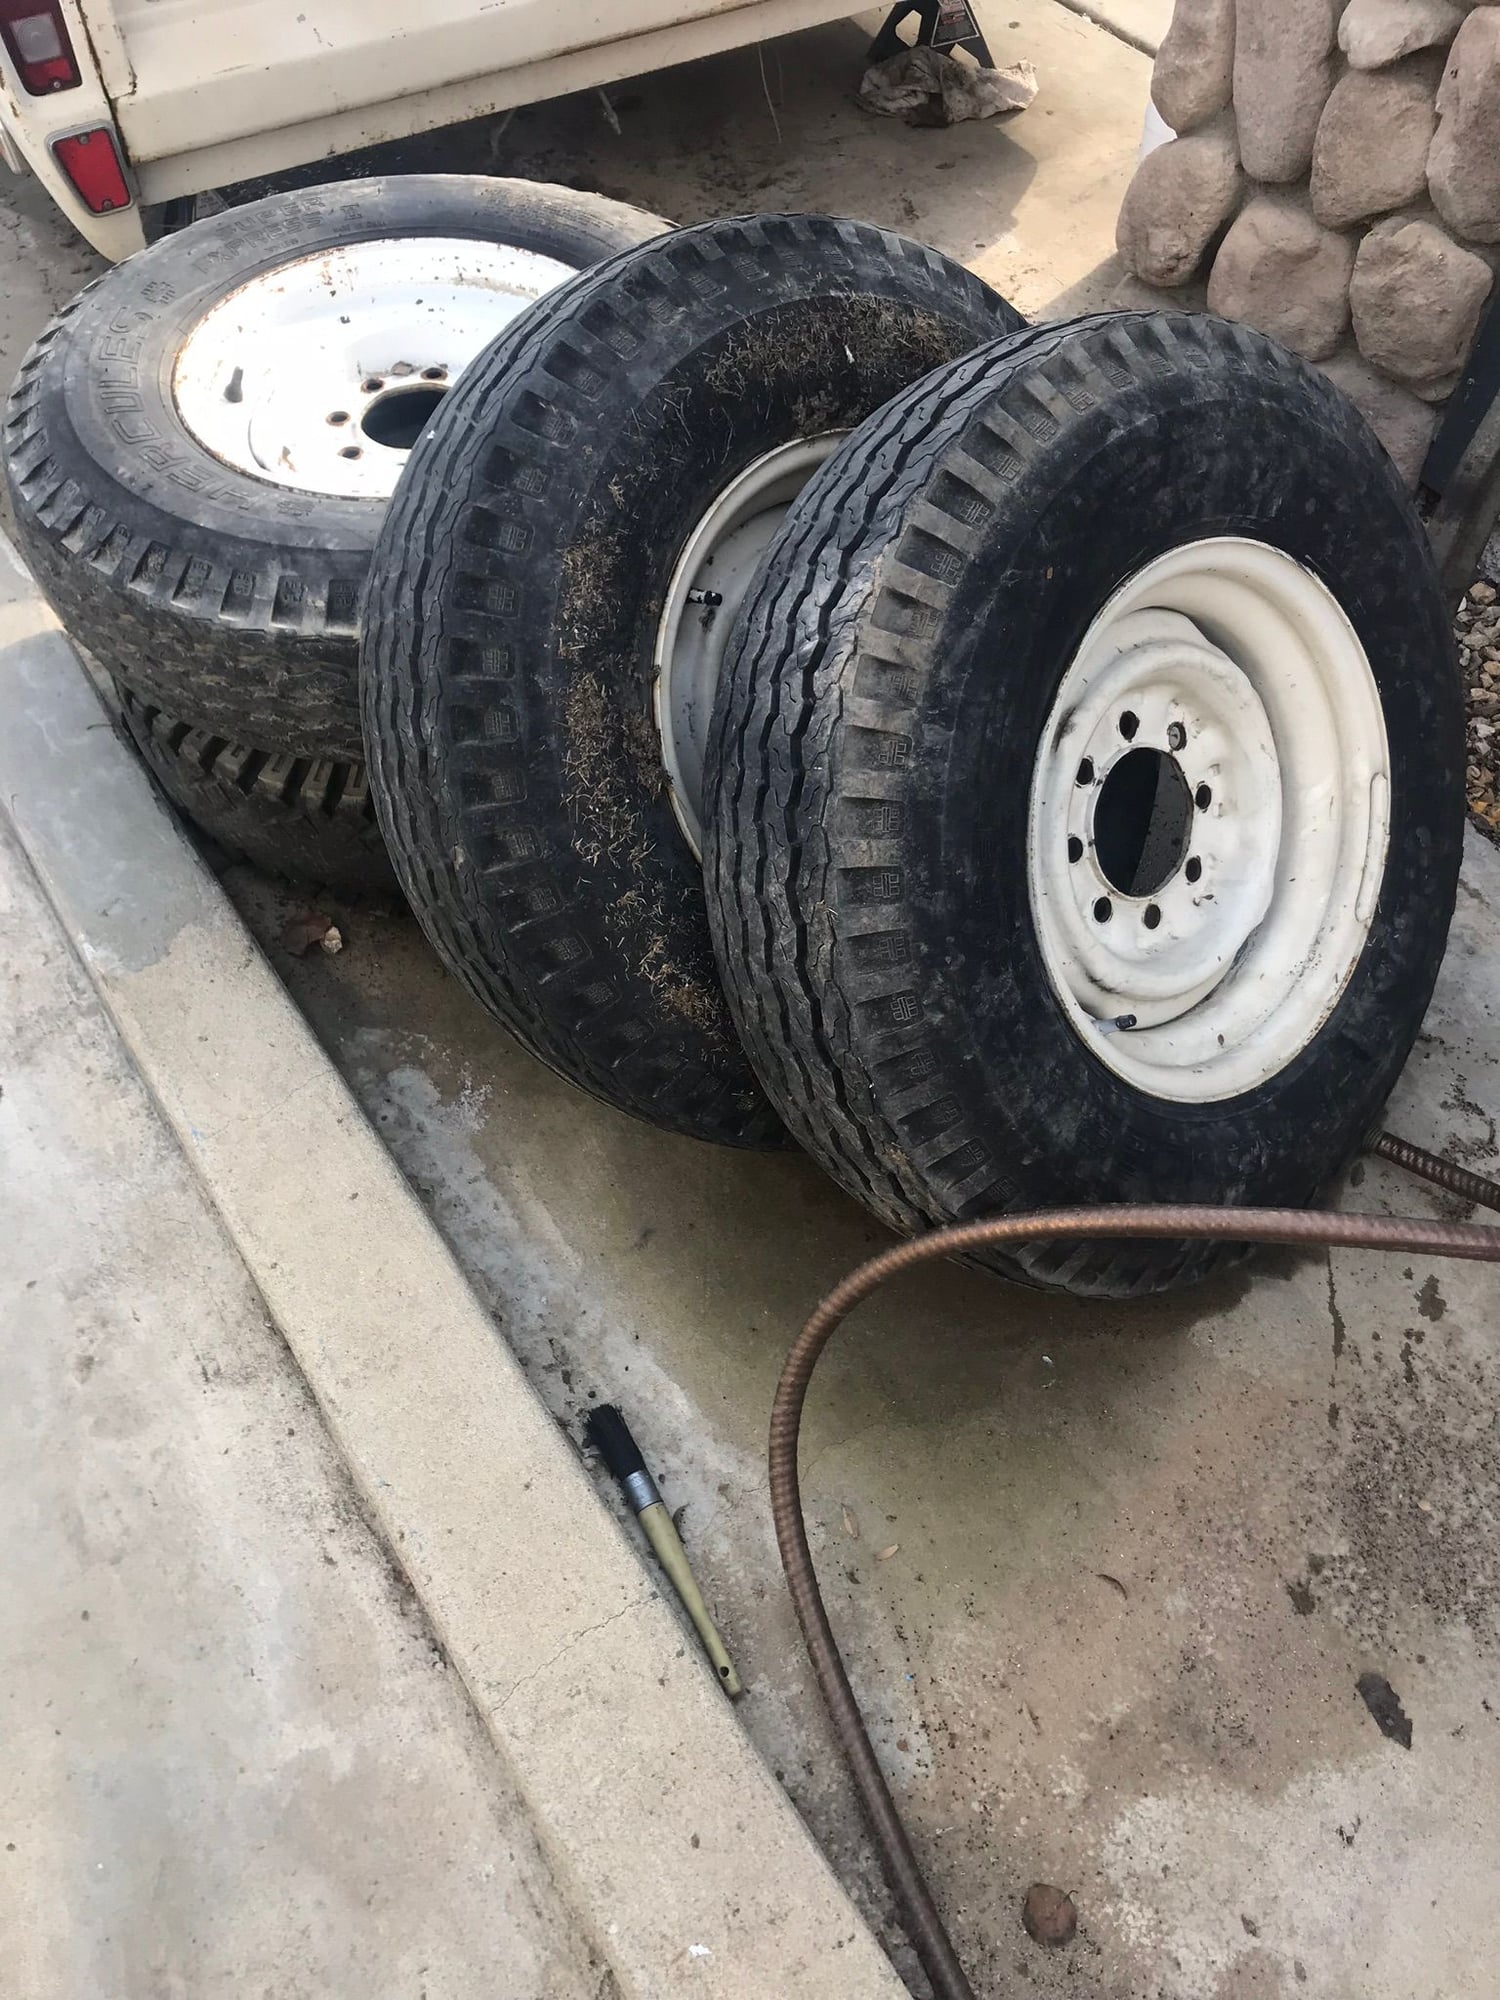 Wheels and Tires/Axles - 69 f series steel rims 16x7 8 lug - Used - All Years Ford F Series - Bakersfield, CA 93312, United States